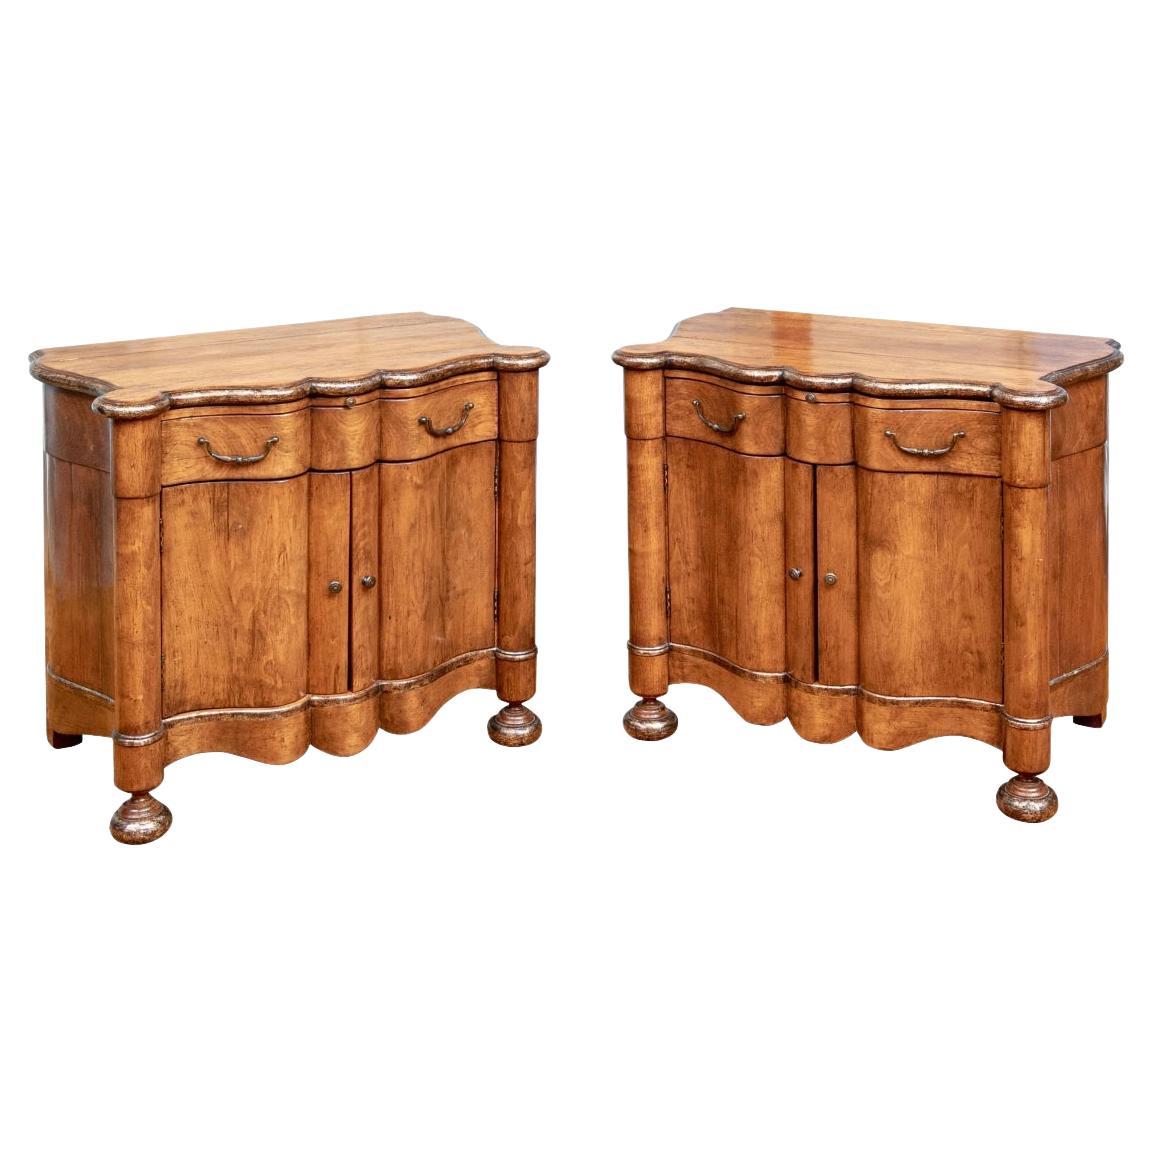 Pair Of Custom Netherlands Cabinets By Gregorius Pineo 2001